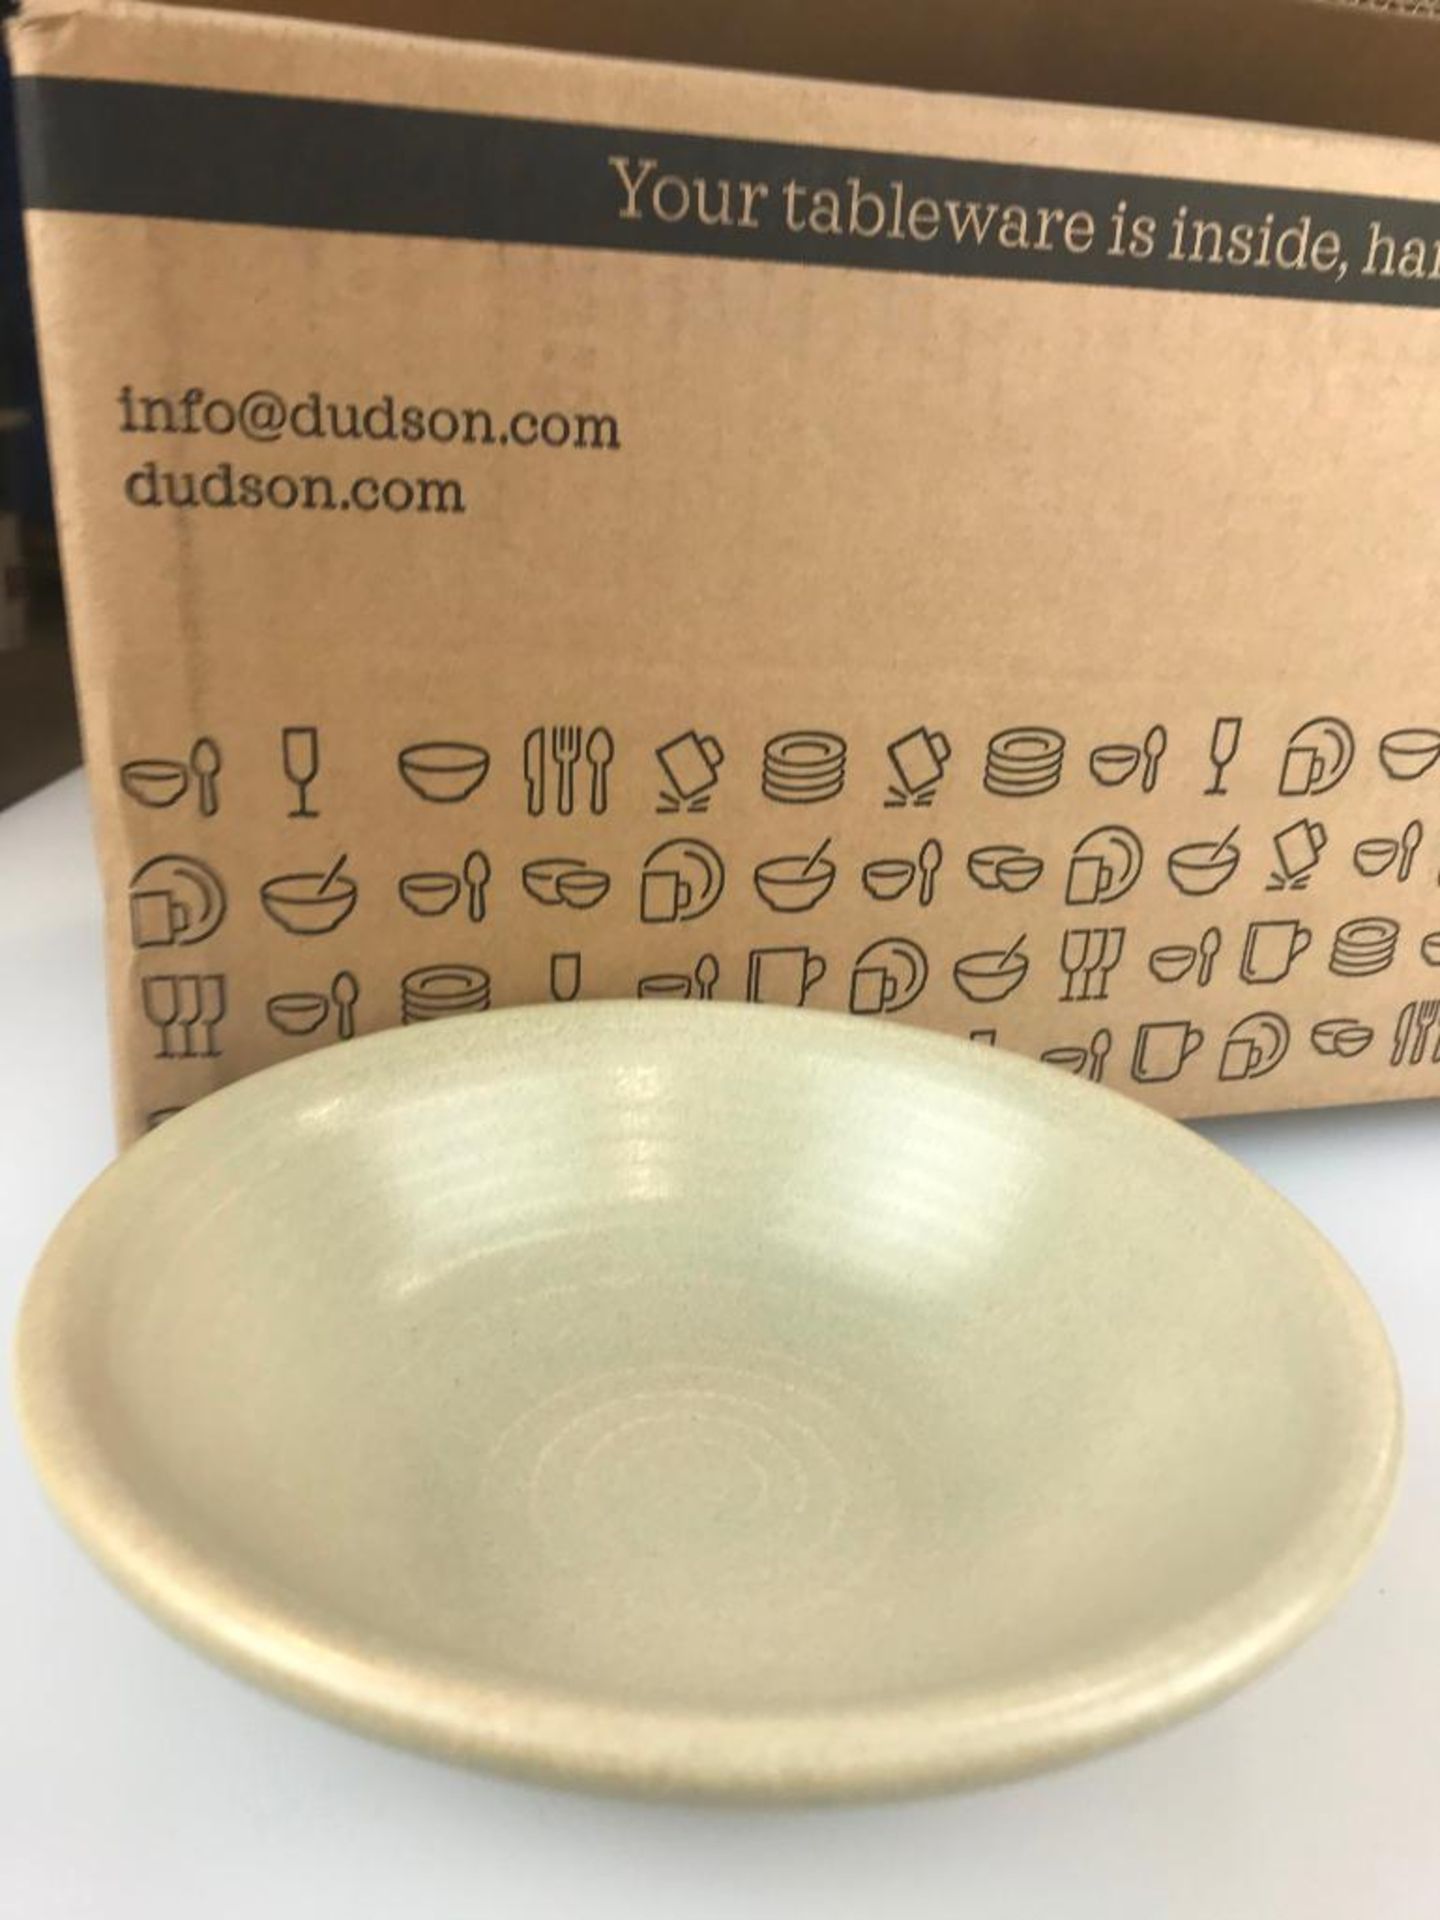 DUDSON EVO SAND OATMEAL BOWL 6 3/8" - 24/CASE, MADE IN ENGLAND - Image 3 of 6